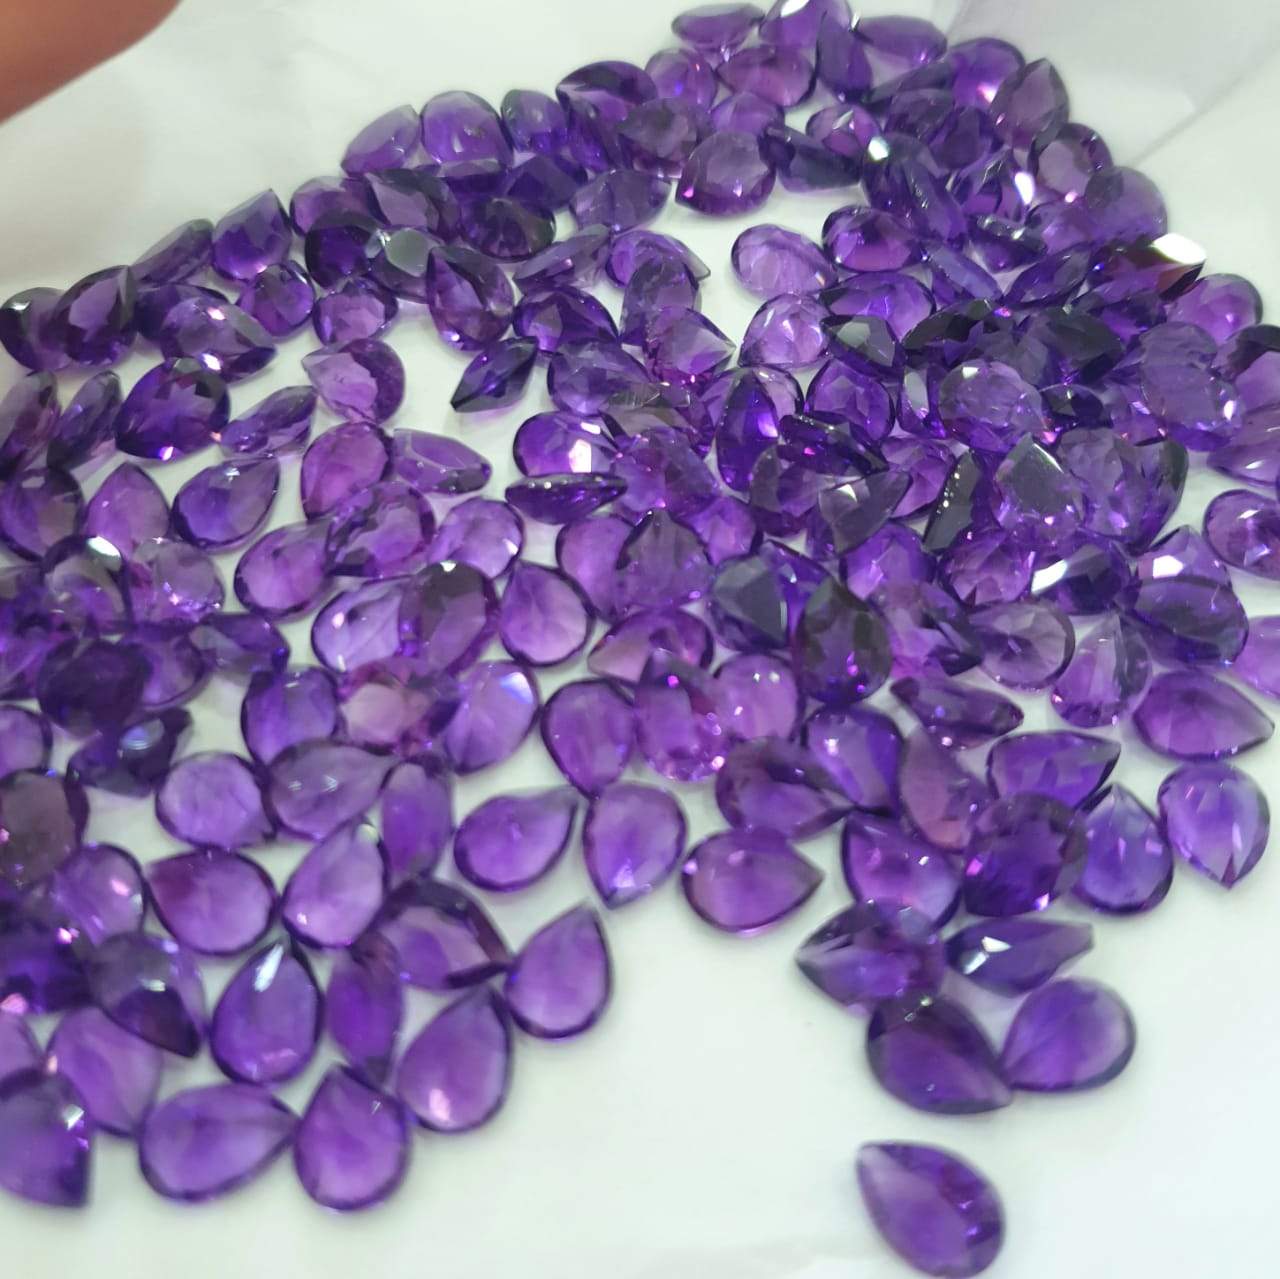 12 Pcs Amethyst Pears 8x6mm | Top Quality Calibrated Size - The LabradoriteKing